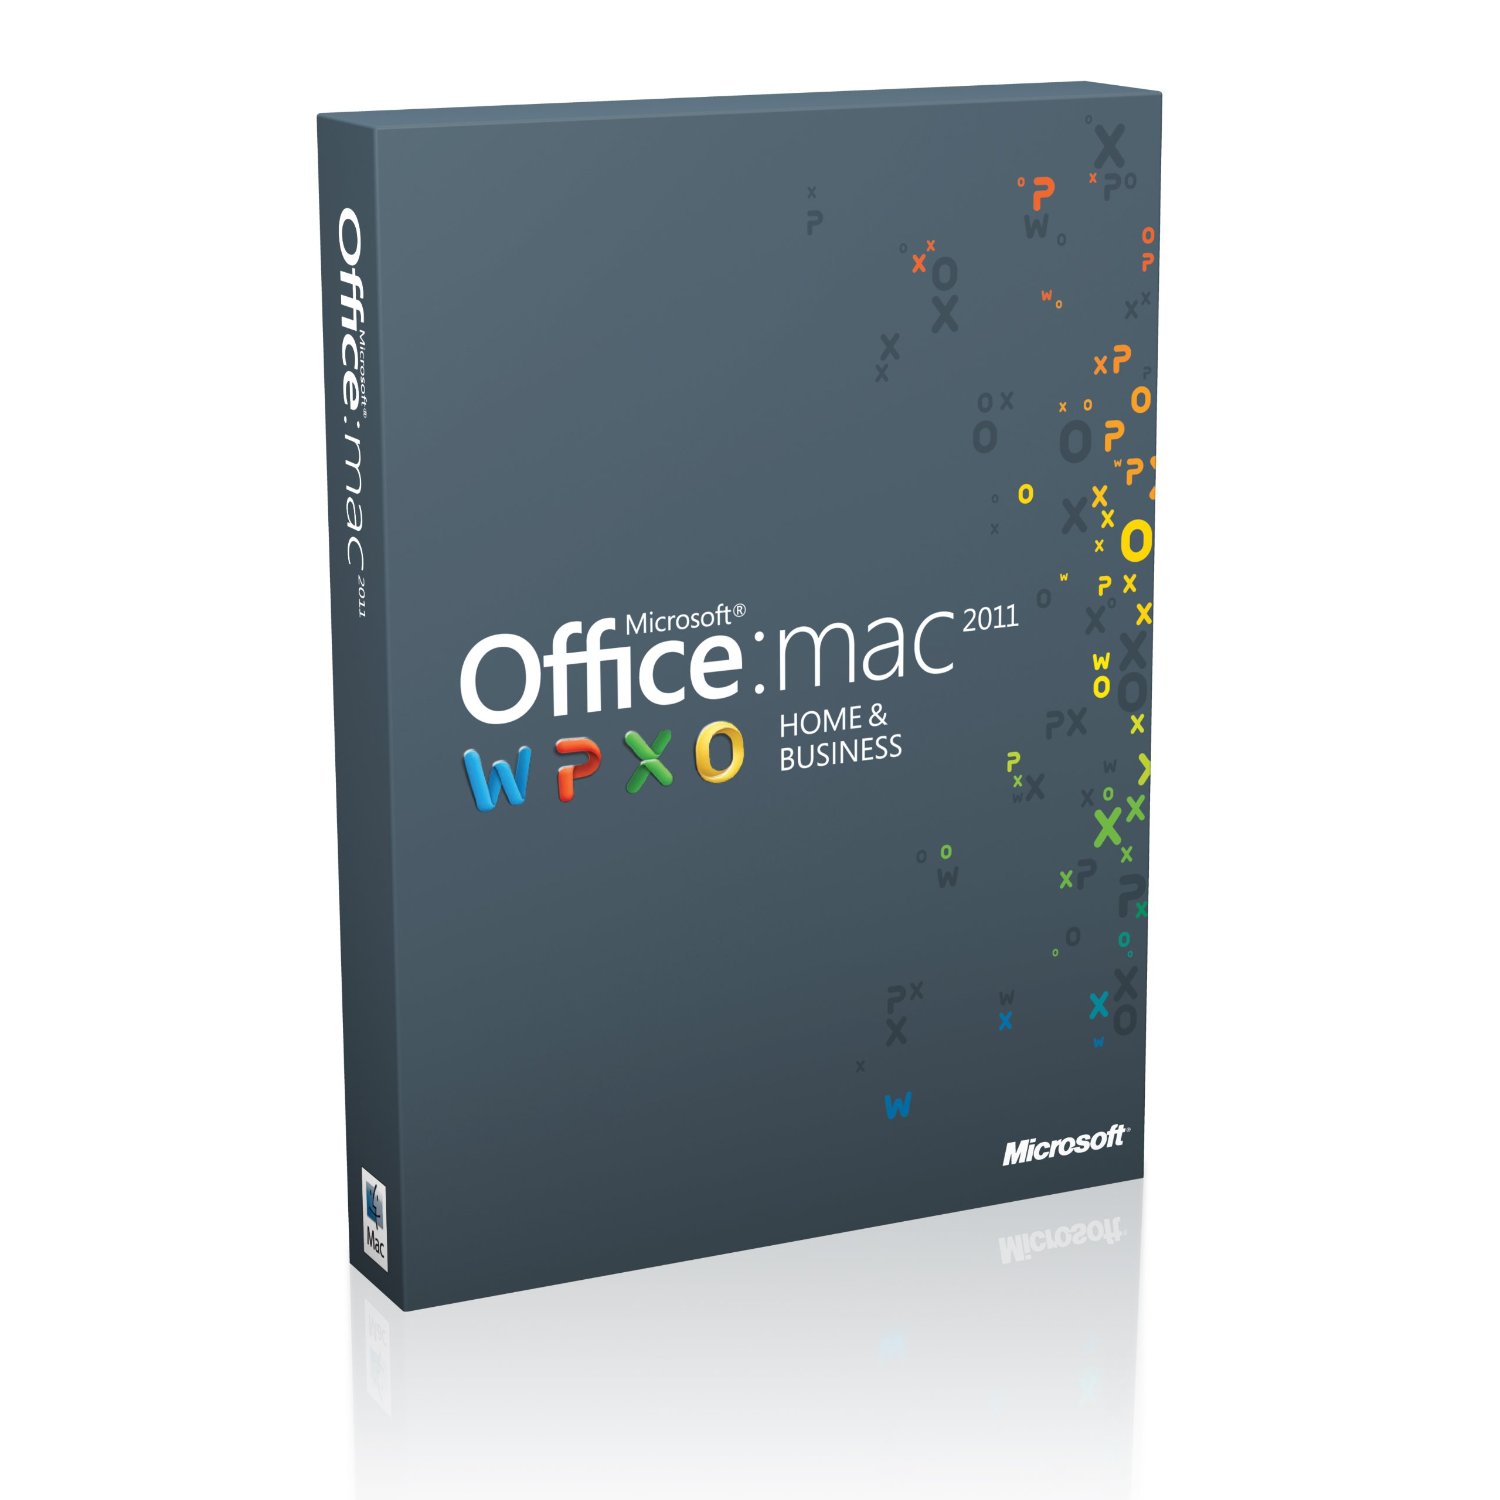 Microsoft Office For Mac Trials